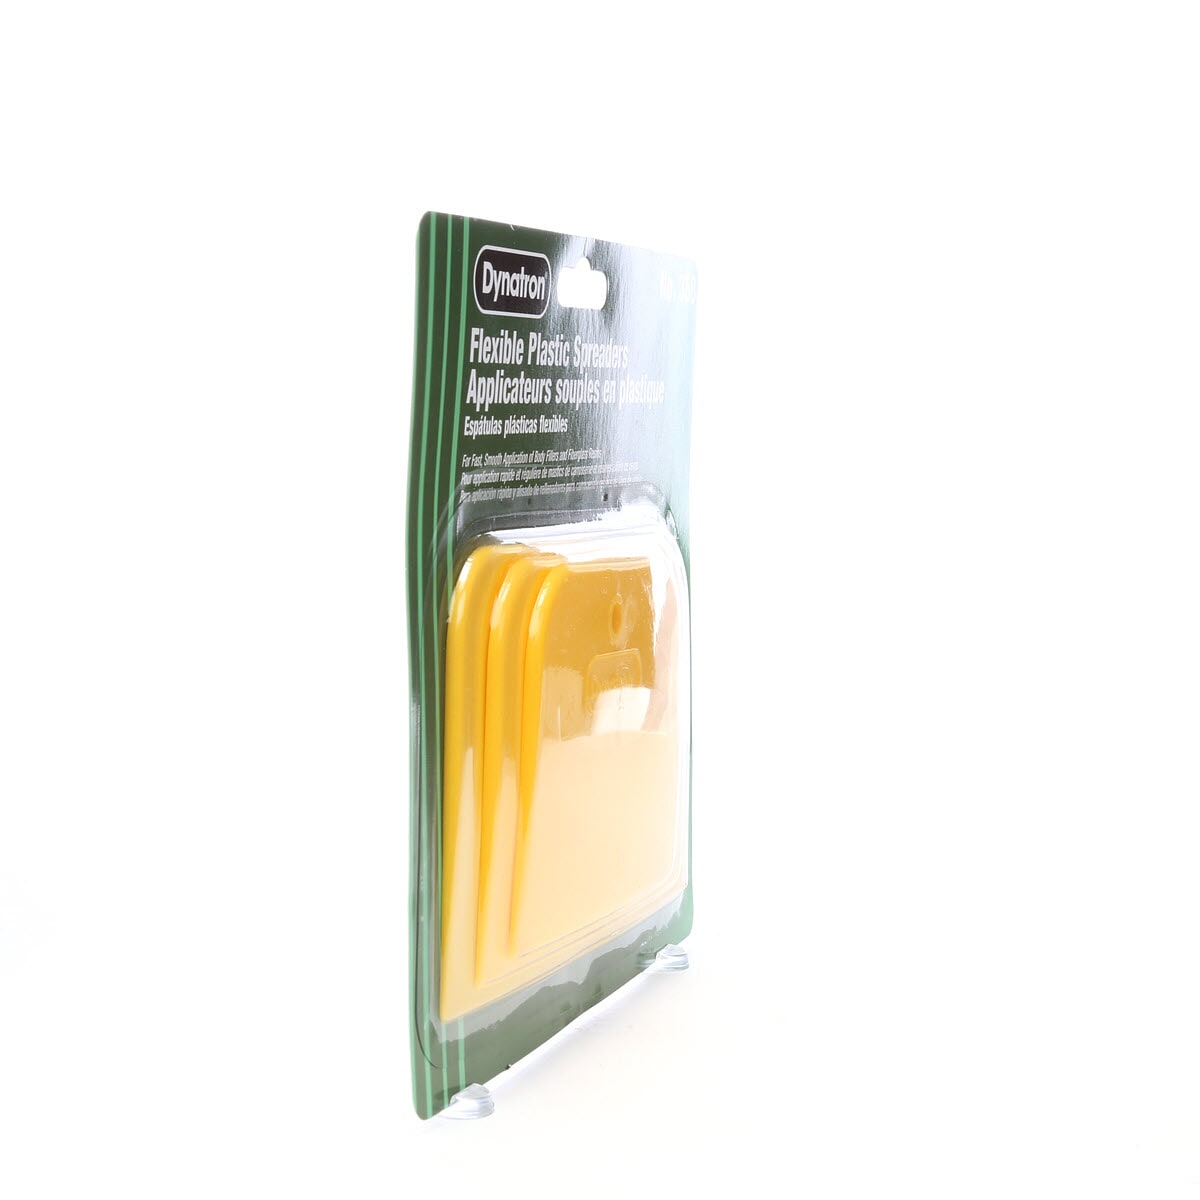 3M 7000045476 Spreader, For Use With Filler, Caulk, Glaze and Putties, Yellow